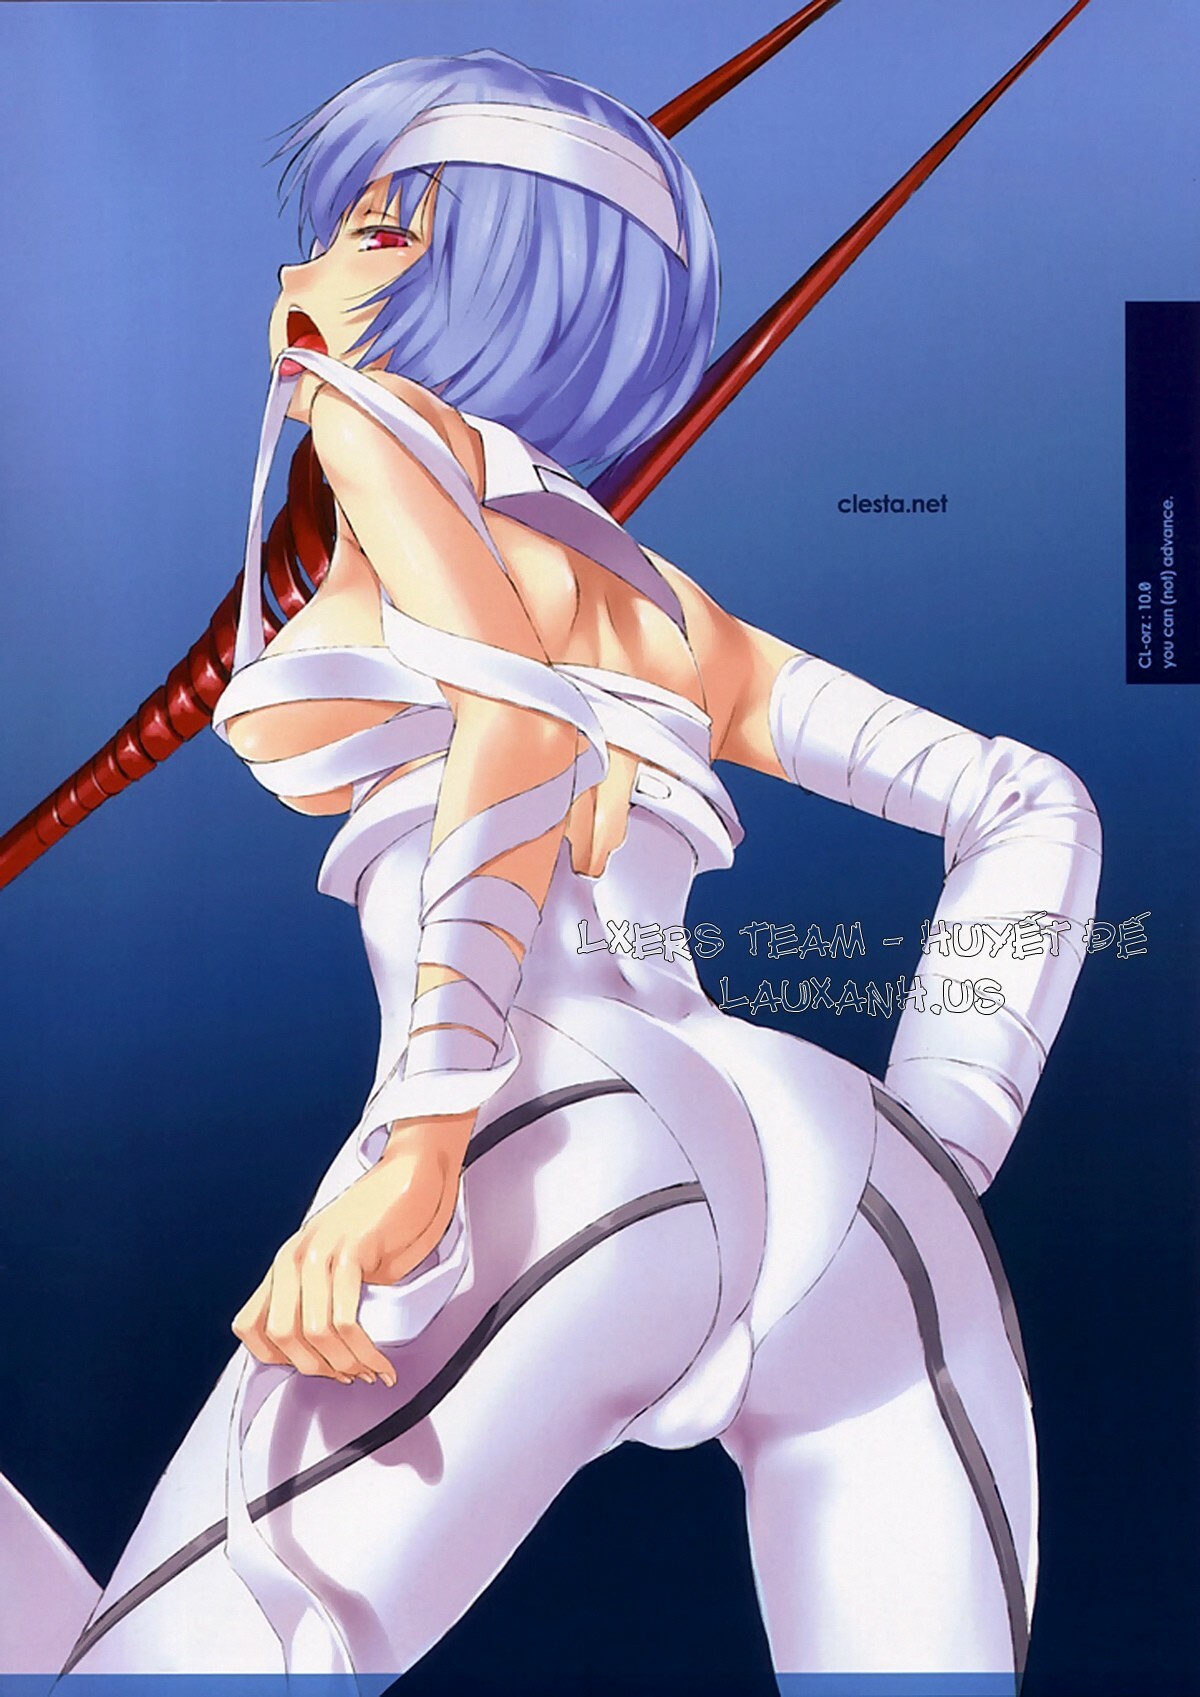 (SC48) [Clesta (Cle Masahiro)] CL-orz: 10.0 - you can (not) advance (Rebuild of Evangelion) [Vietnamese Tiếng Việt] [Decensored] page 16 full